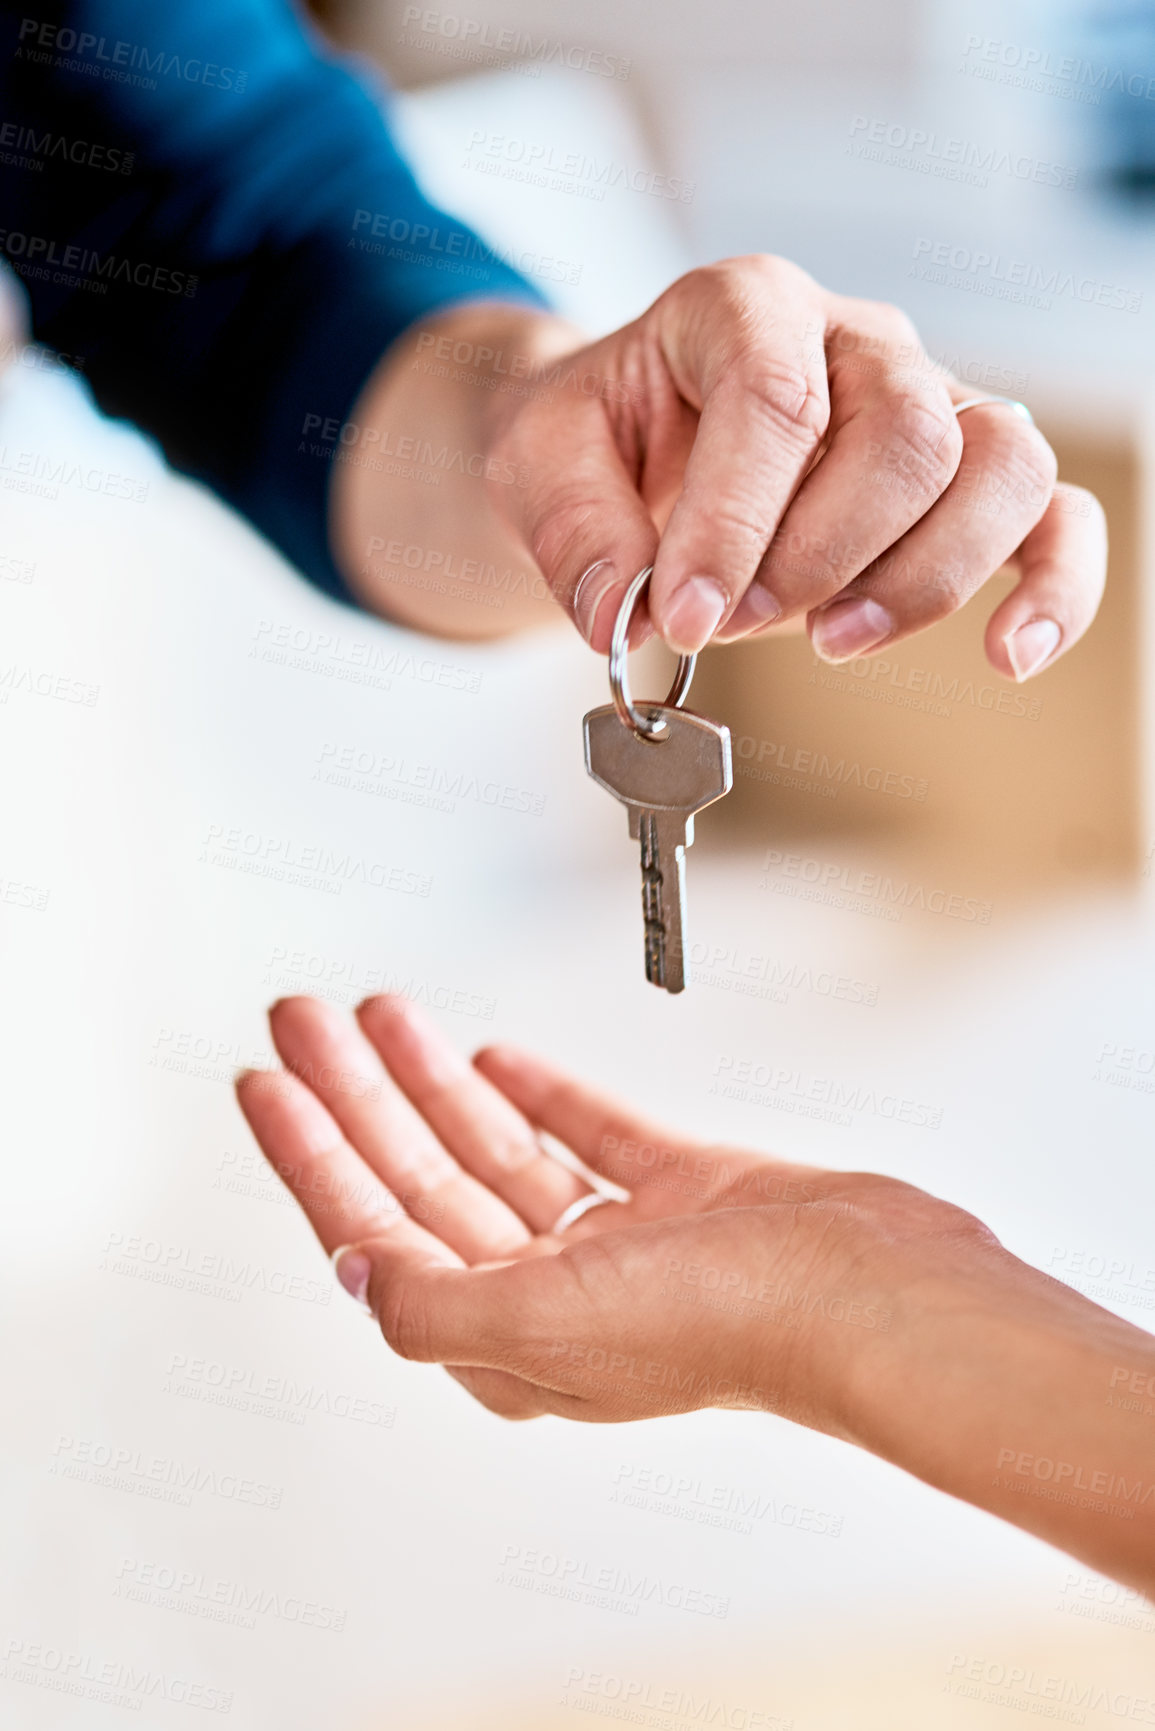 Buy stock photo Shot of a unrecognizable person receiving a key from another person inside during the day